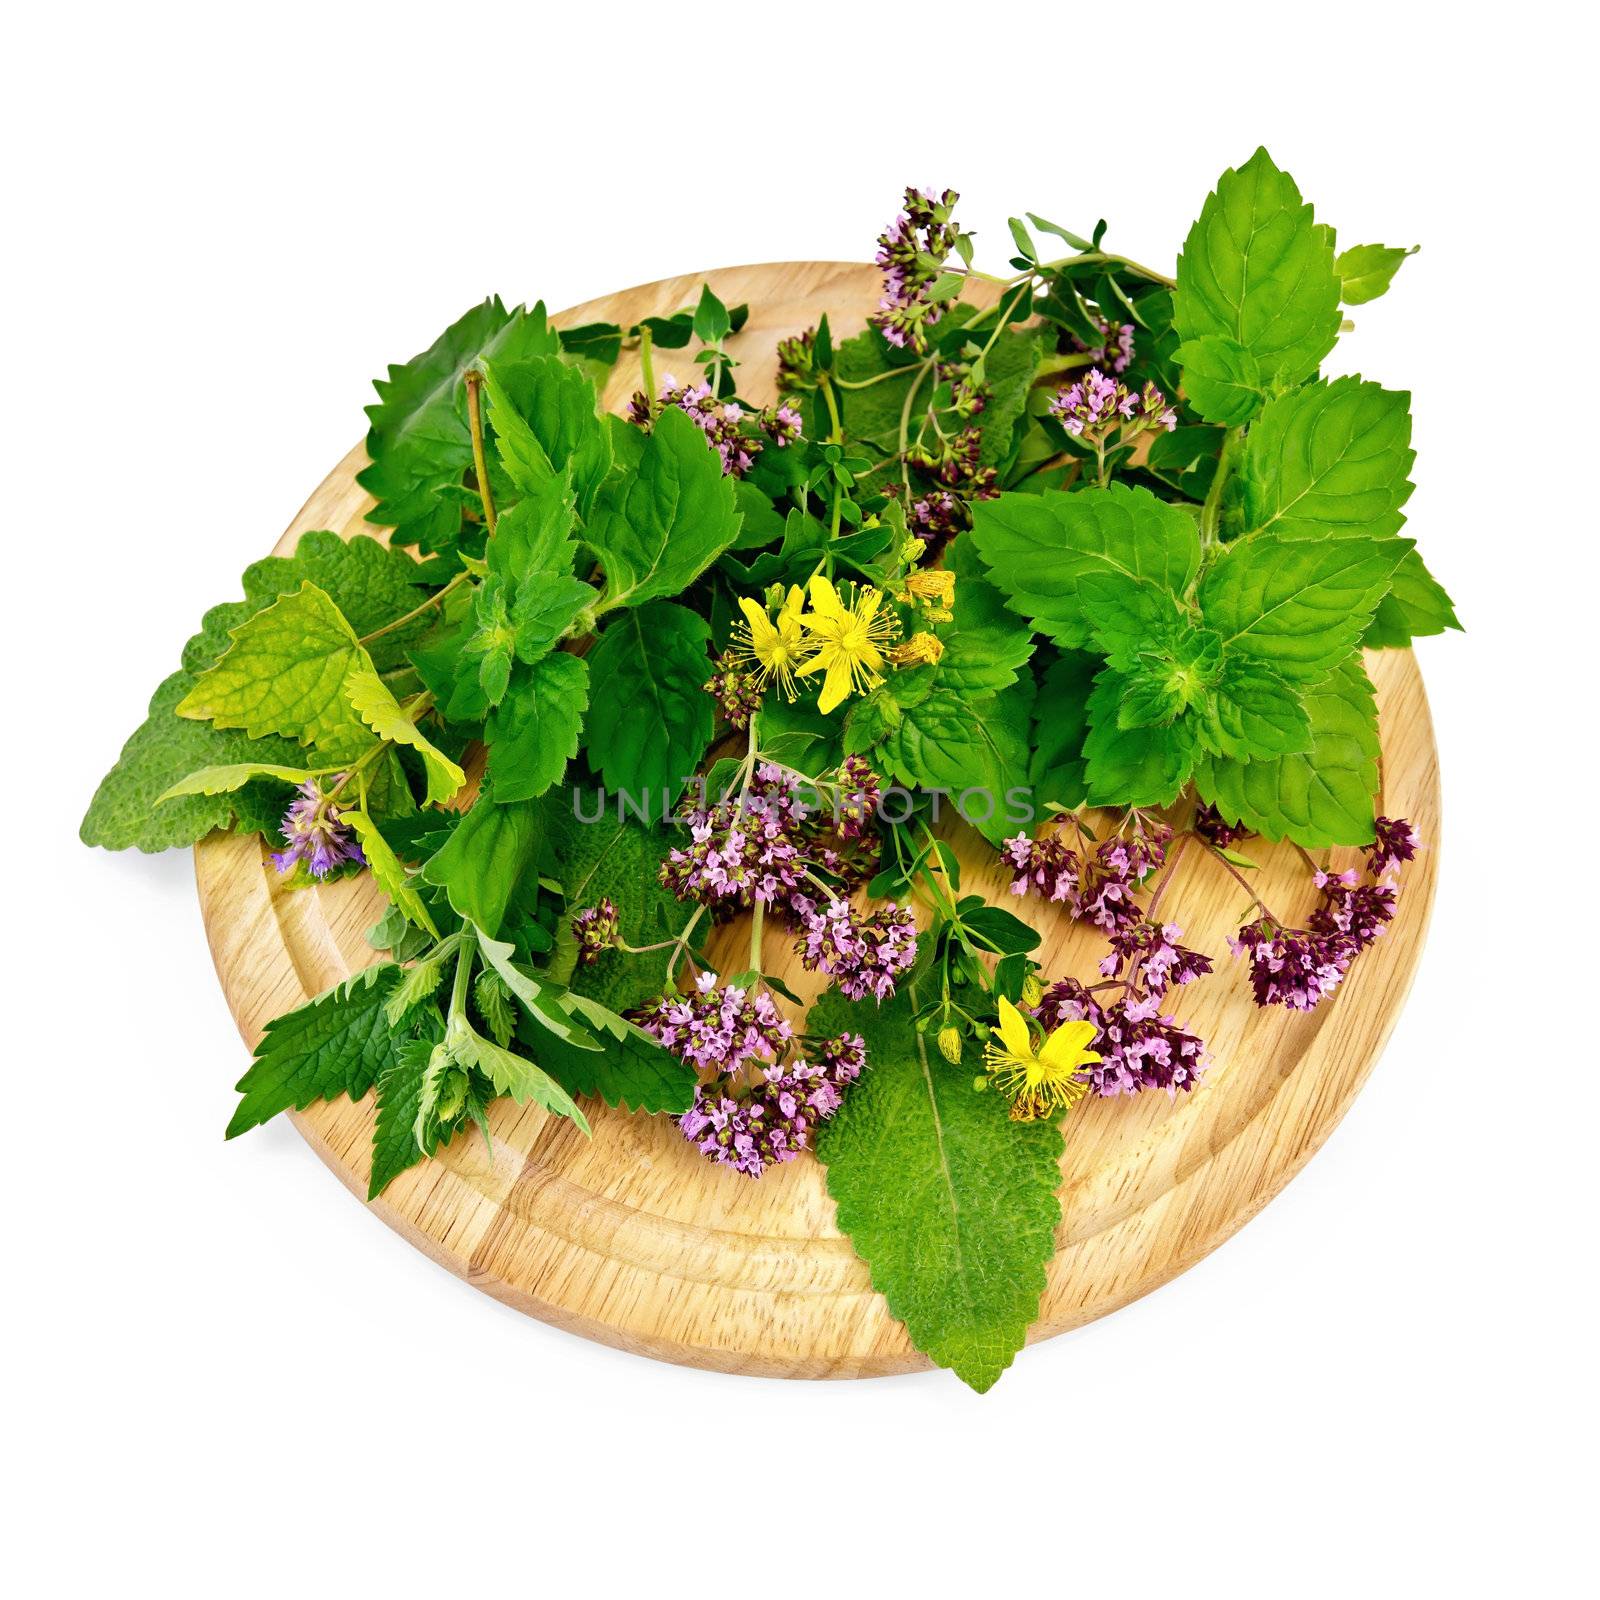 Sprigs of mint, lemon balm, oregano, tutsan, sage leaves on a round wooden board isolated on white background